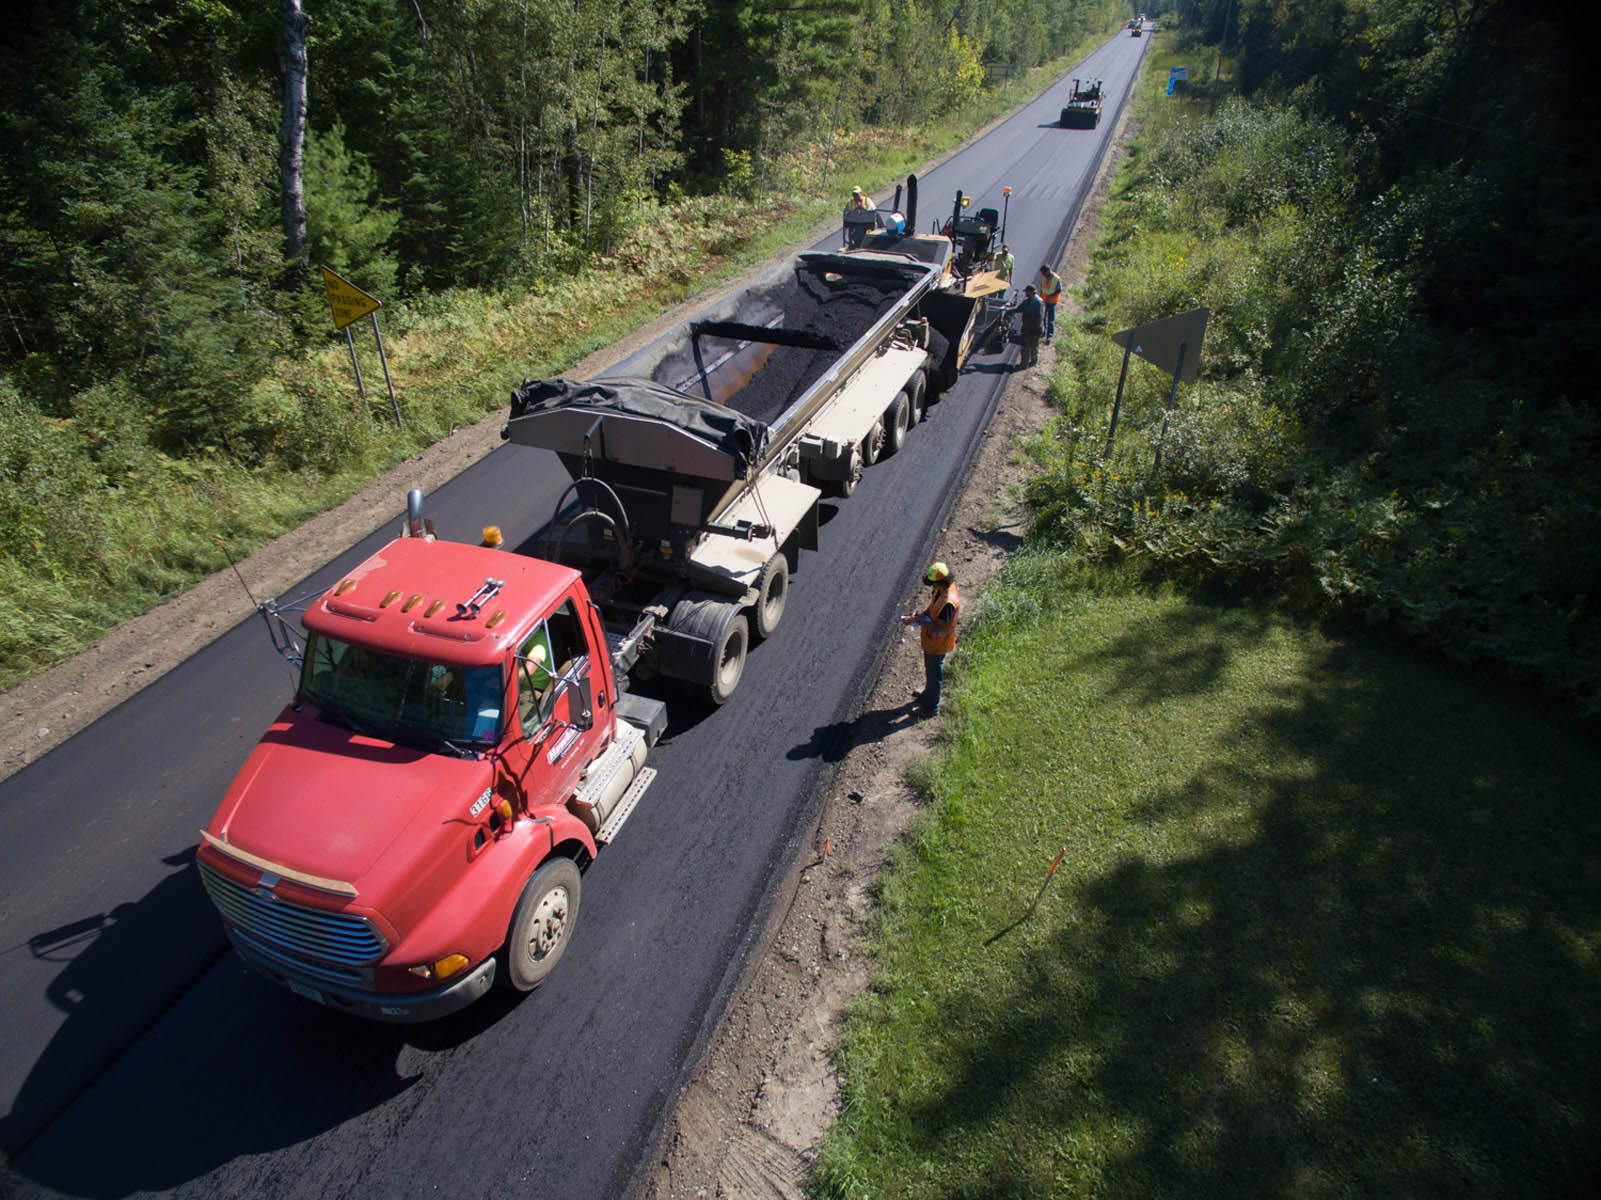 Birds-eye view of dump truck hauling and dumping asphalt on country road